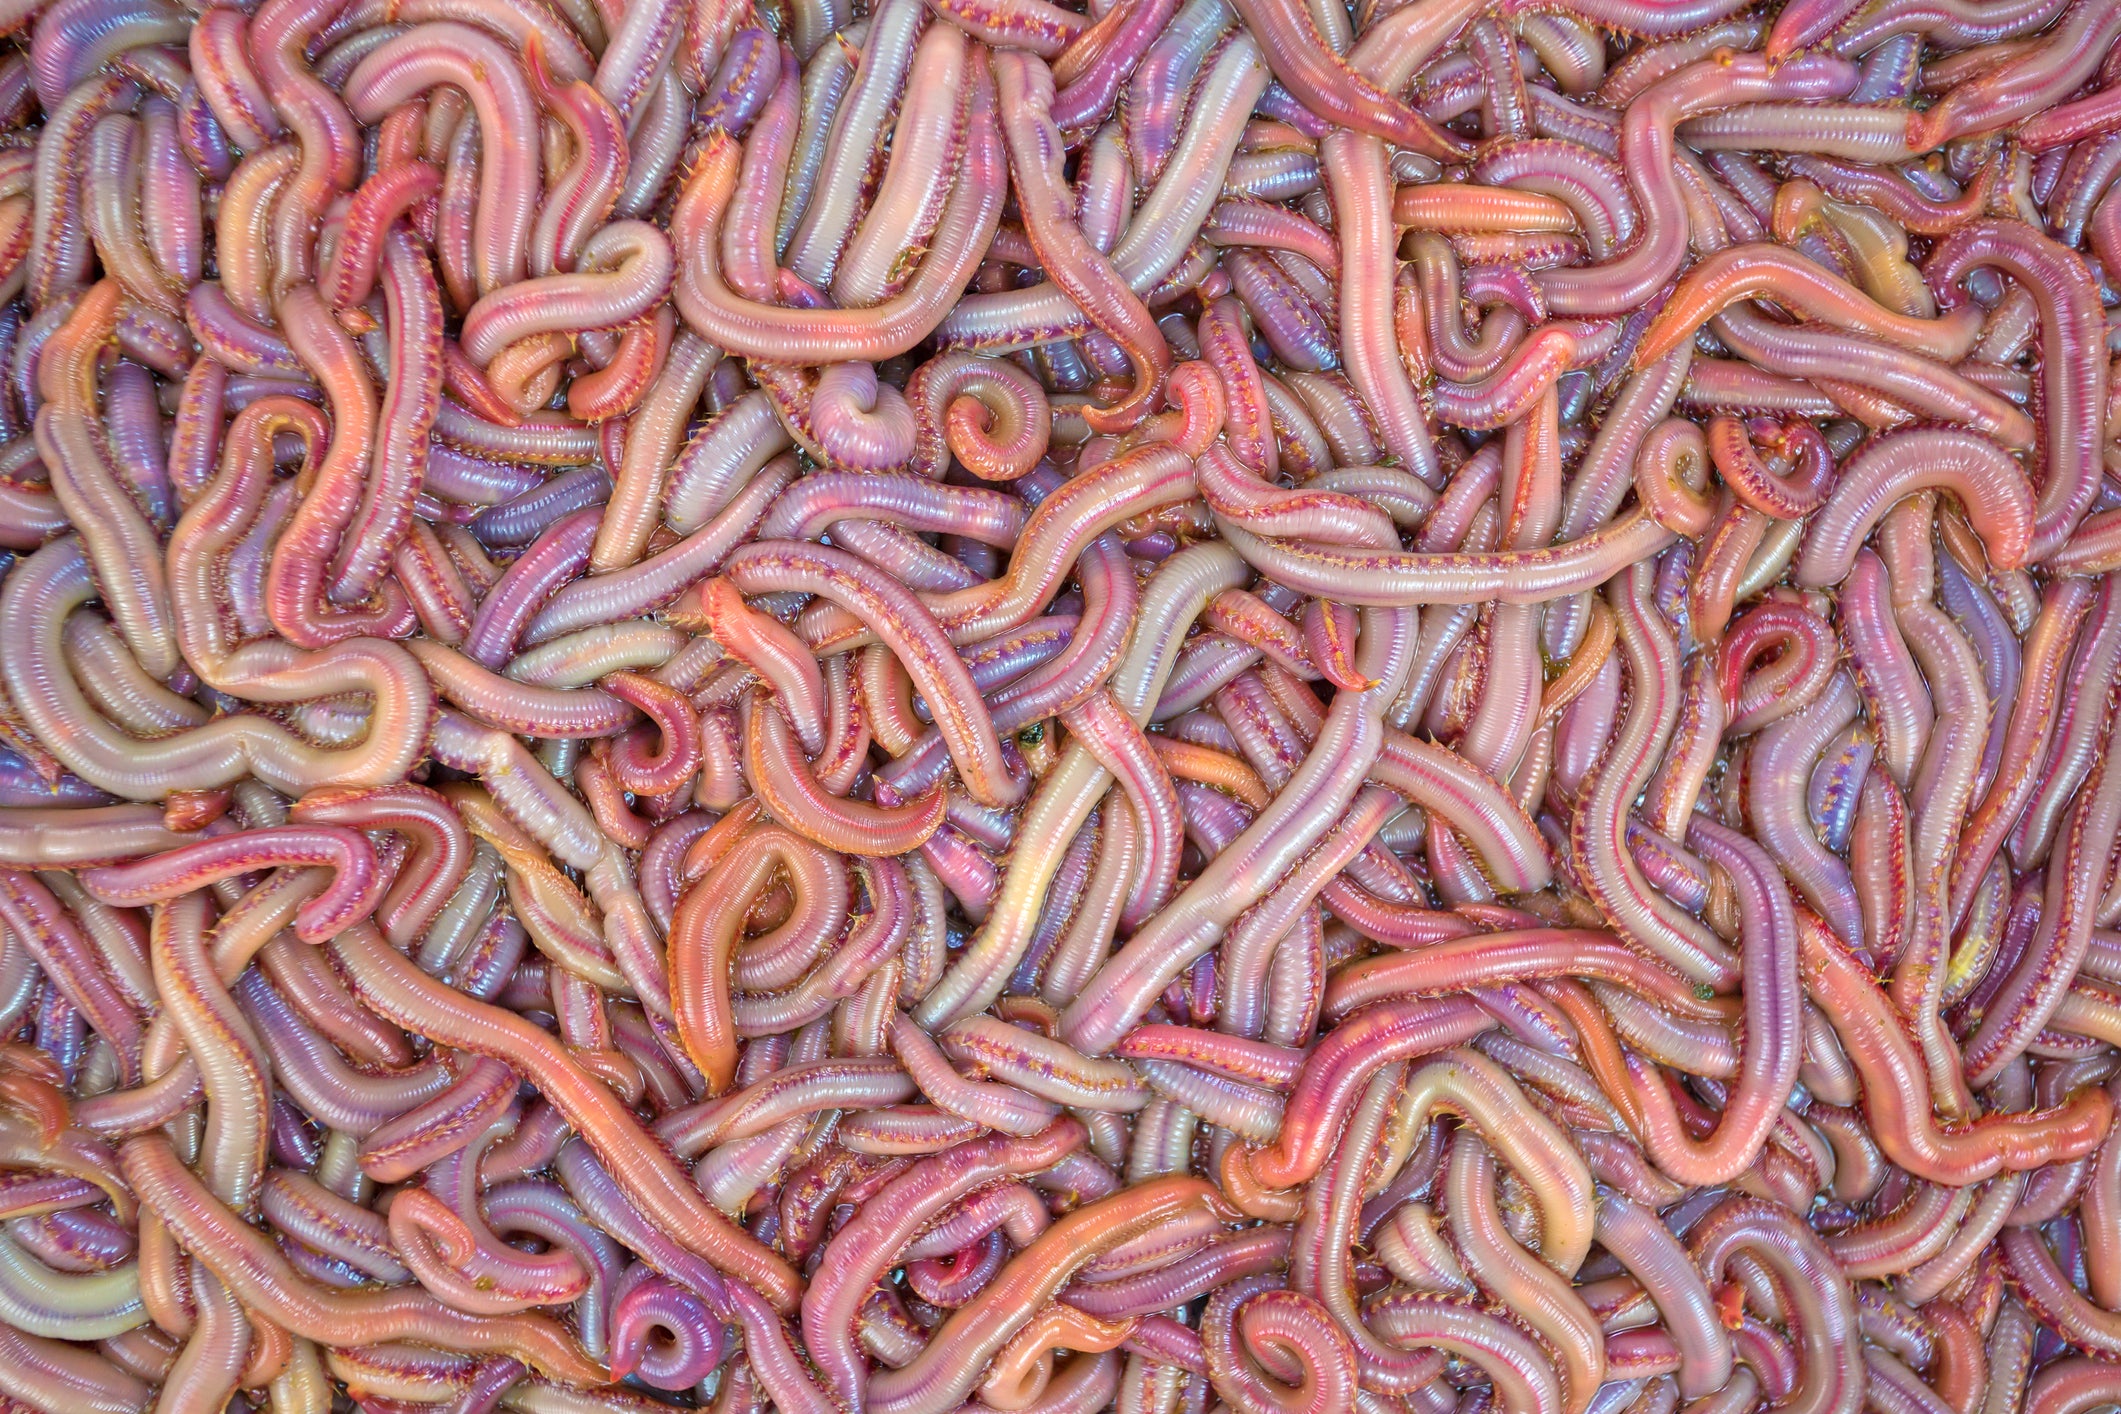 Live Bait Bloodworms for Store Pick-up – Old School Outdoors